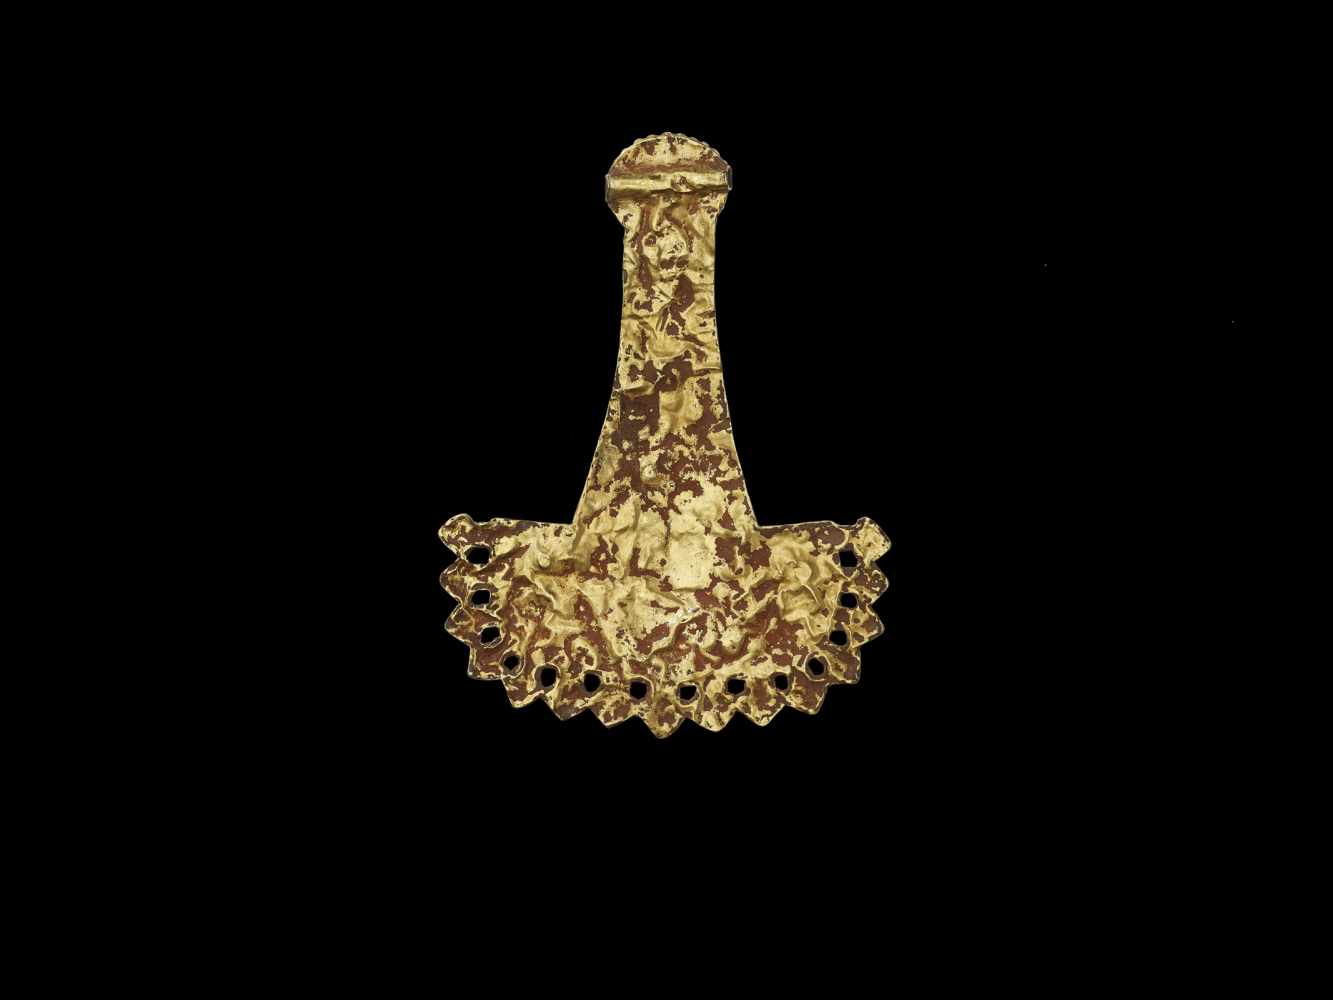 A CHAM REPOUSSÉ GOLD PENDANT WITH INDRA Central or southern Cham kingdom, Tra Kieu Style, 11th – - Image 2 of 4